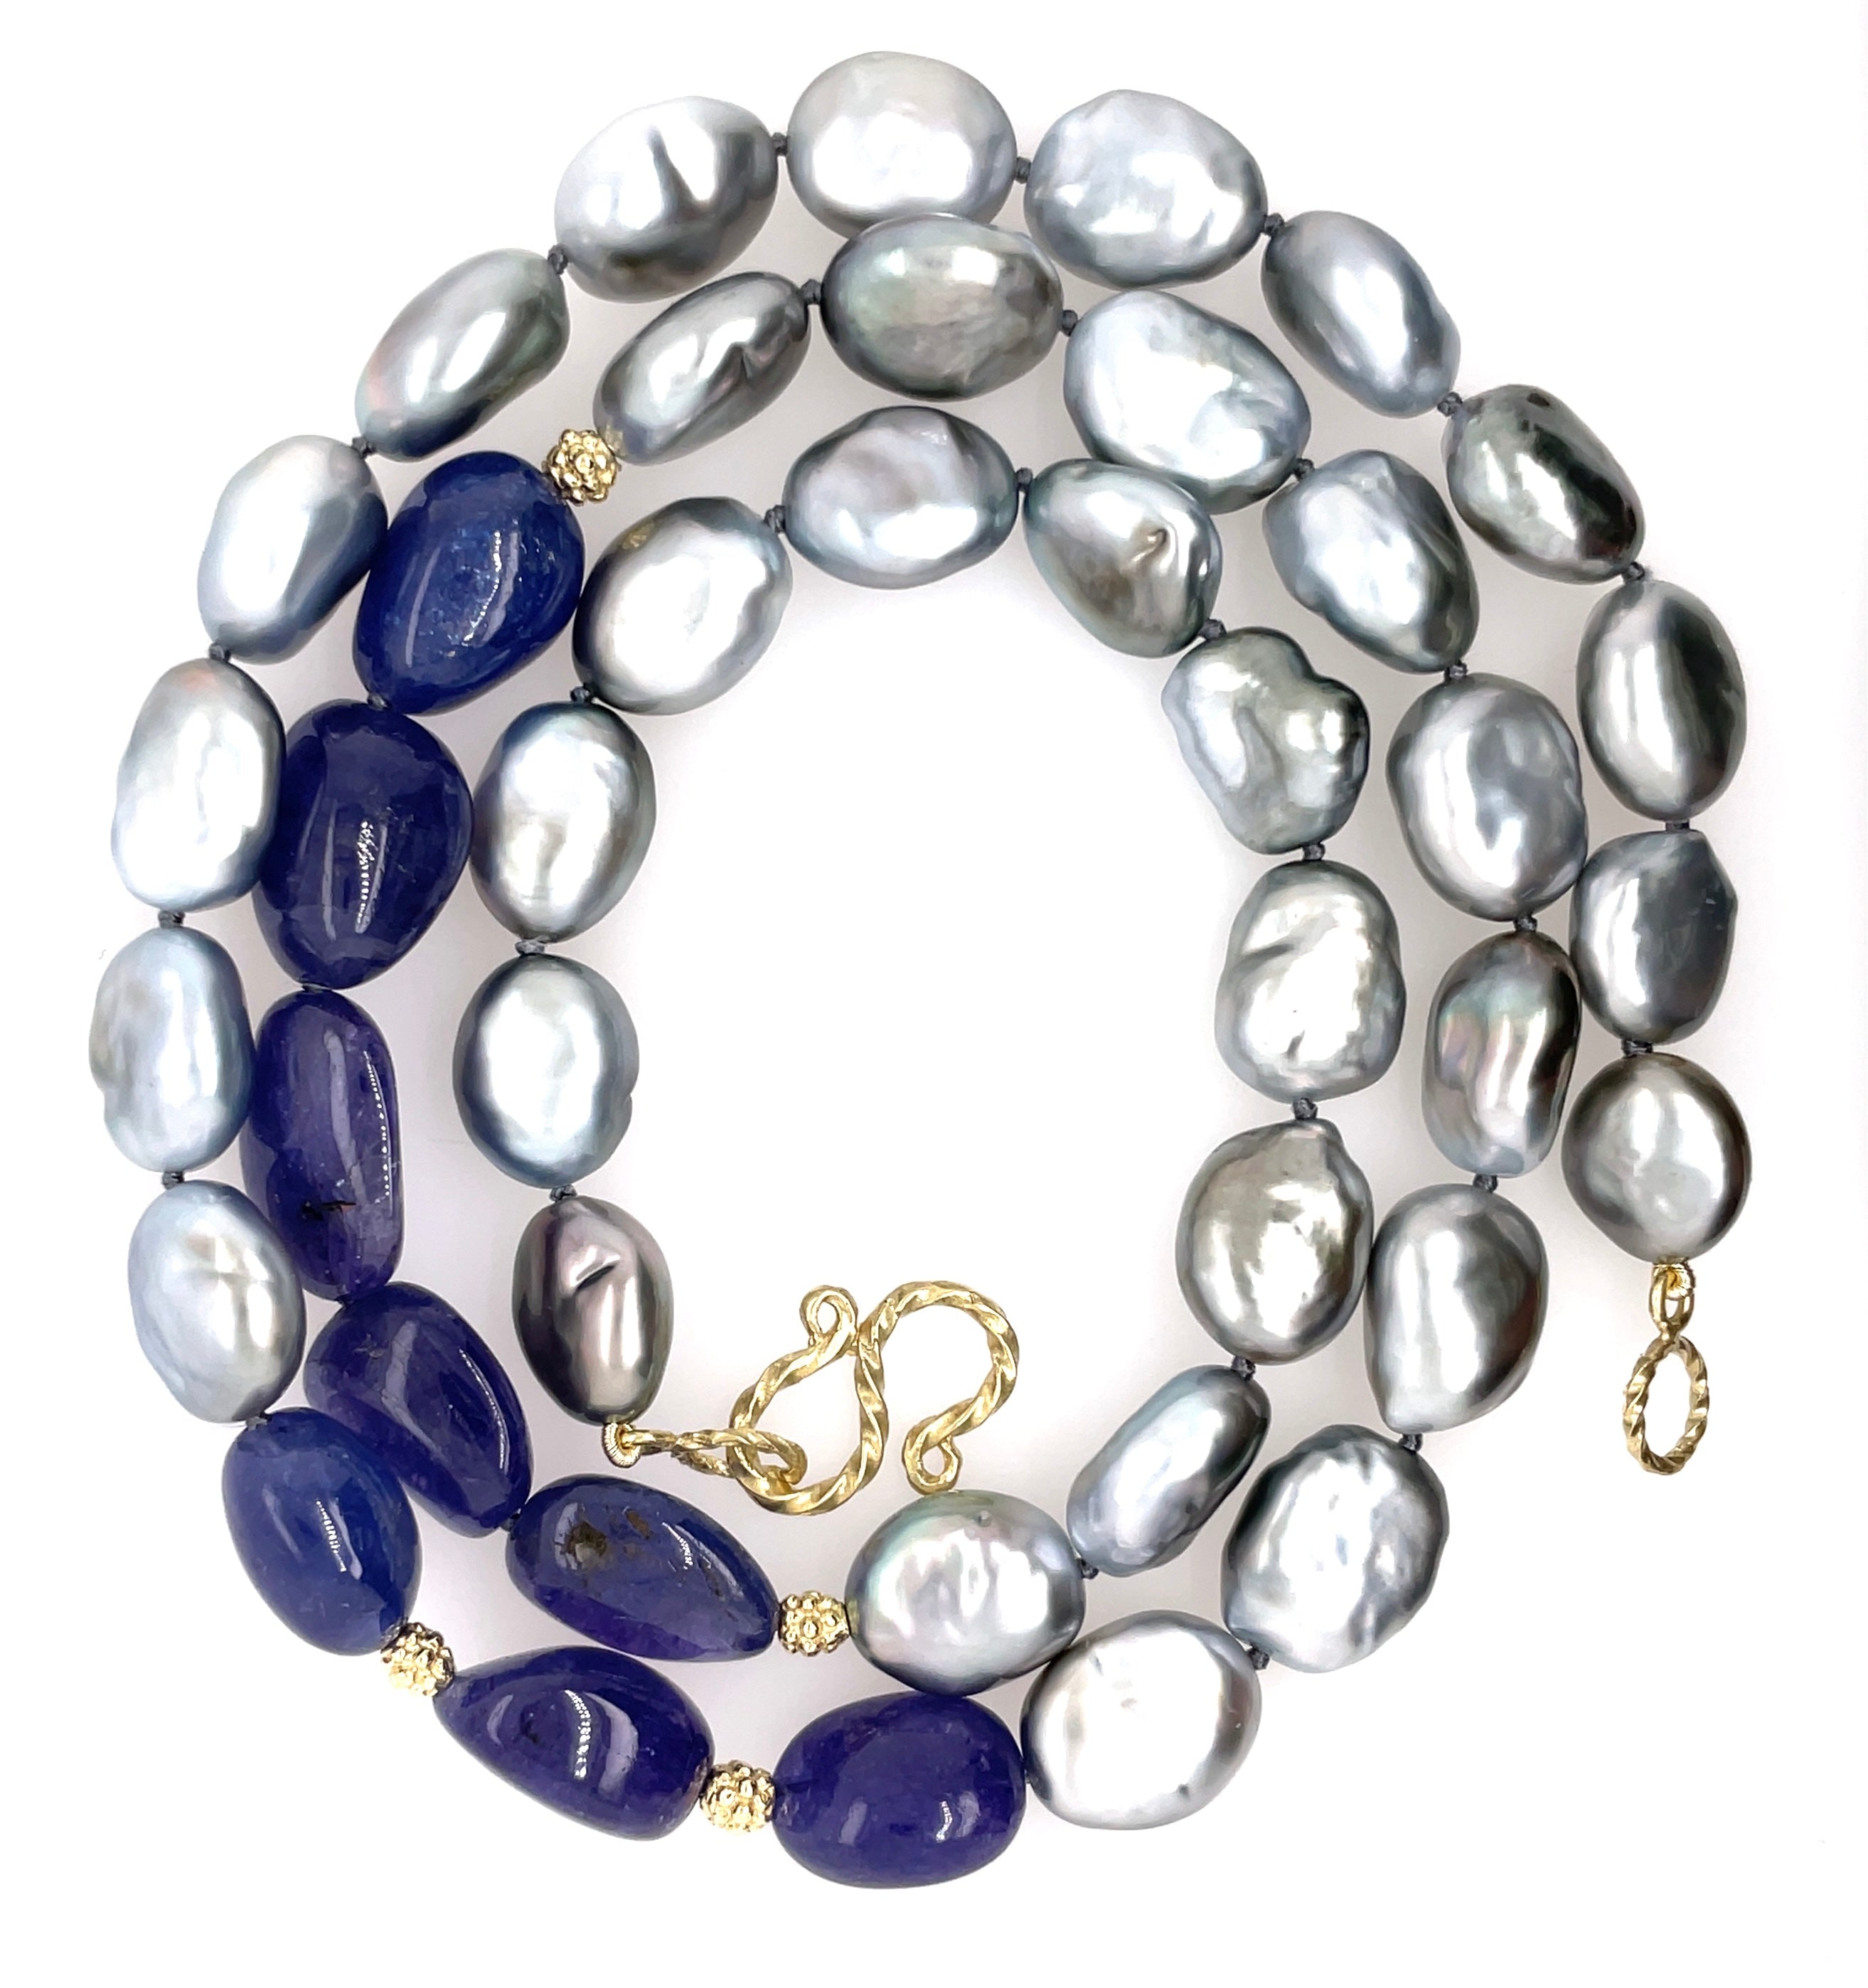 24" South Sea Baroque Pearl and Tanzanite Beaded Necklace